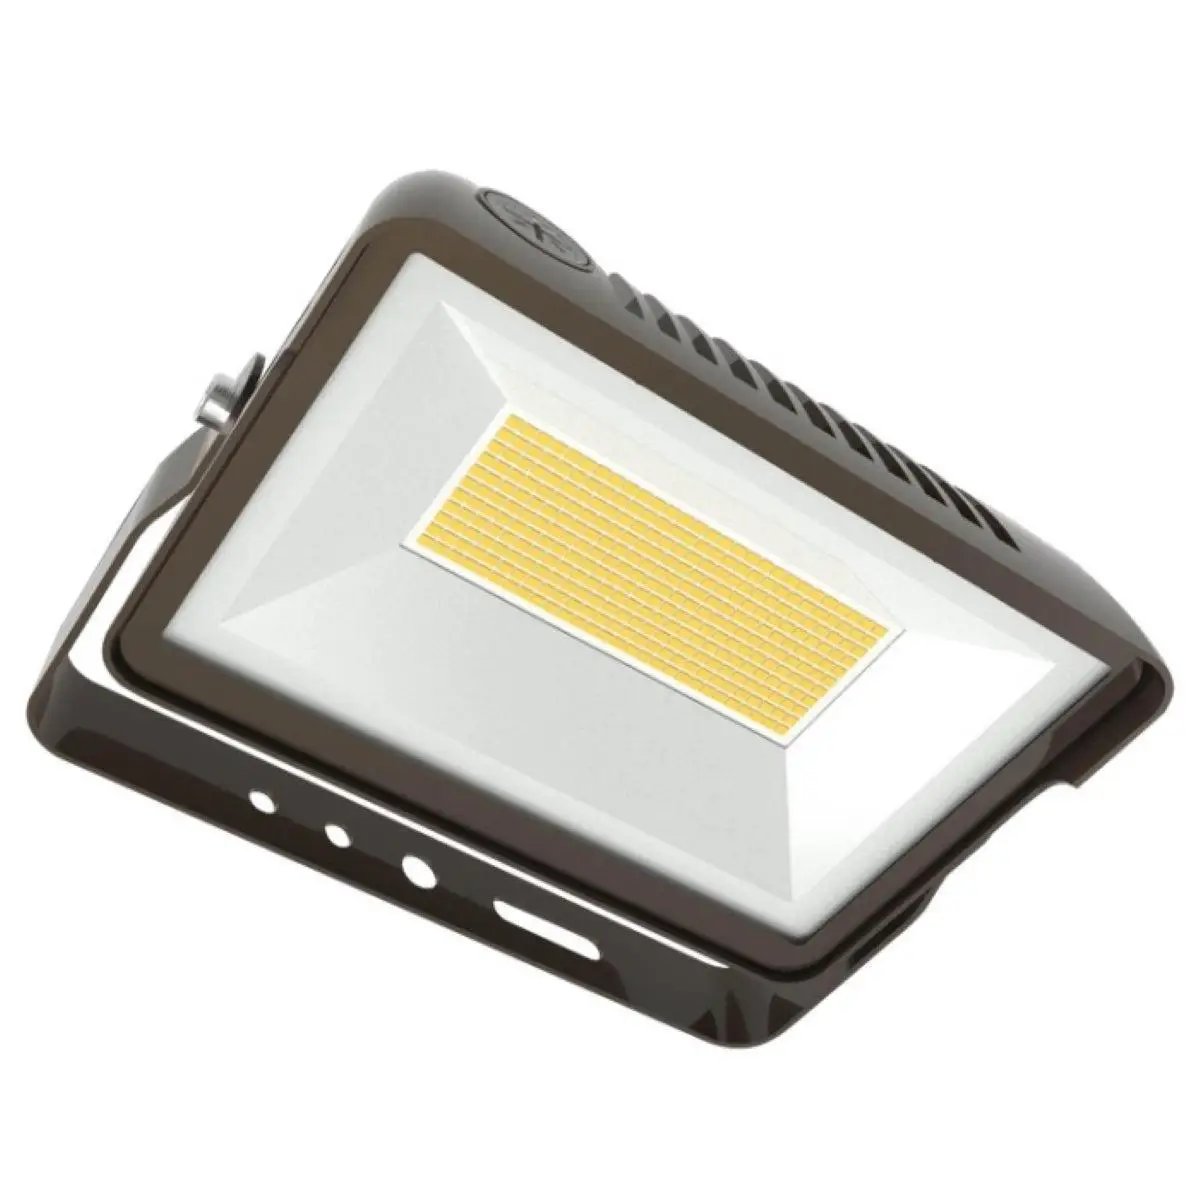 A close-up of the Keystone Technologies Dusk to Dawn Flood Light. Provides 8580 lumens of color adjustable white light. Universal mounting options: knuckle and yoke mount. Built-in dusk-to-dawn photocell for energy savings. Color selectable with switch.